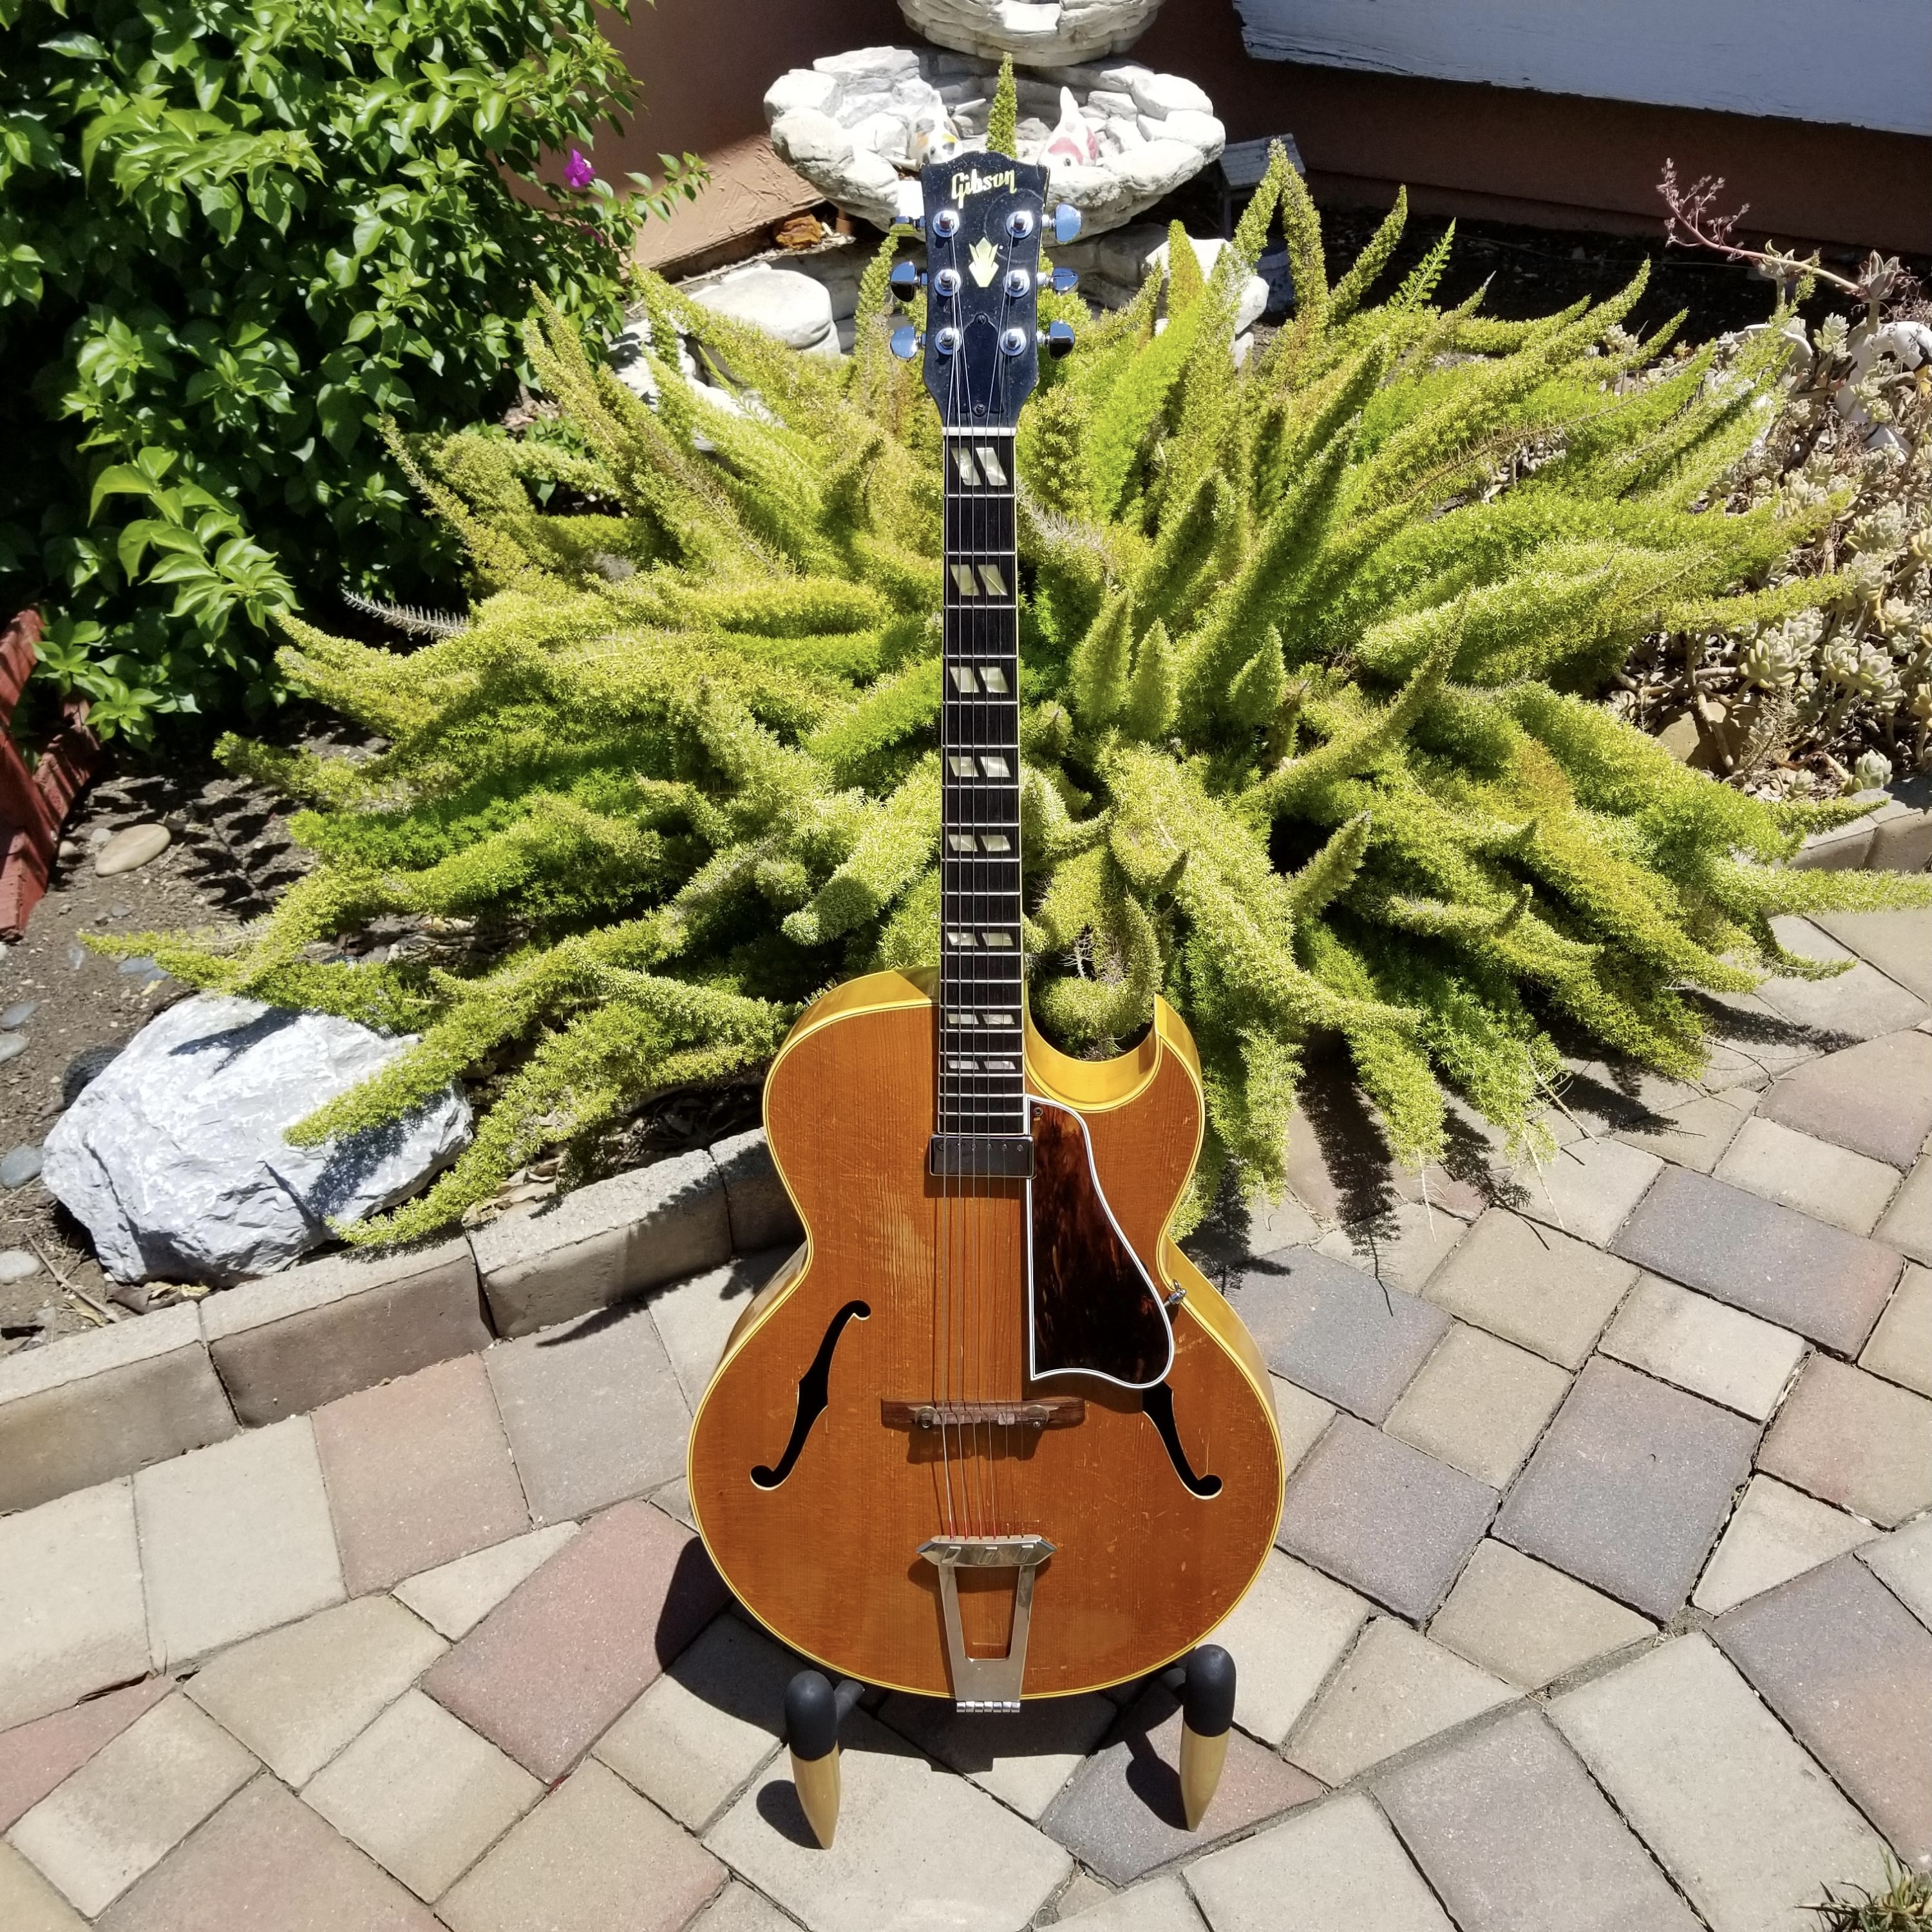 Thoughts On This Near Immaculate 1951 Gibson ES-175-1cae59f1-5f17-4eba-9583-607c800211c0-jpeg